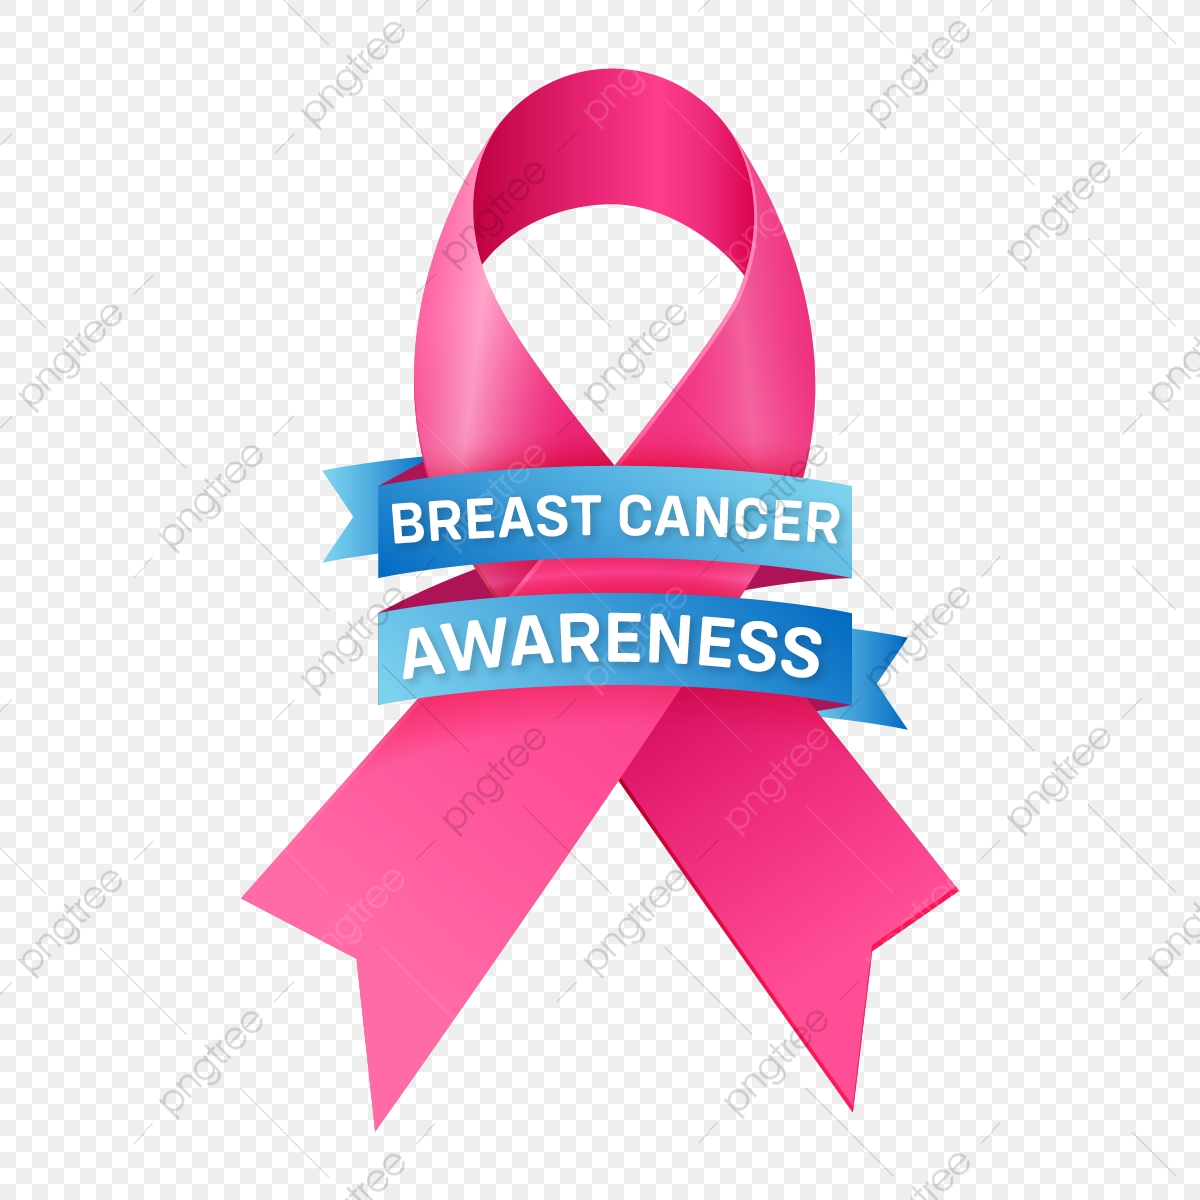 Breast Cancer Awareness Ribbon Background, Cancer, Breast, Ribbon.